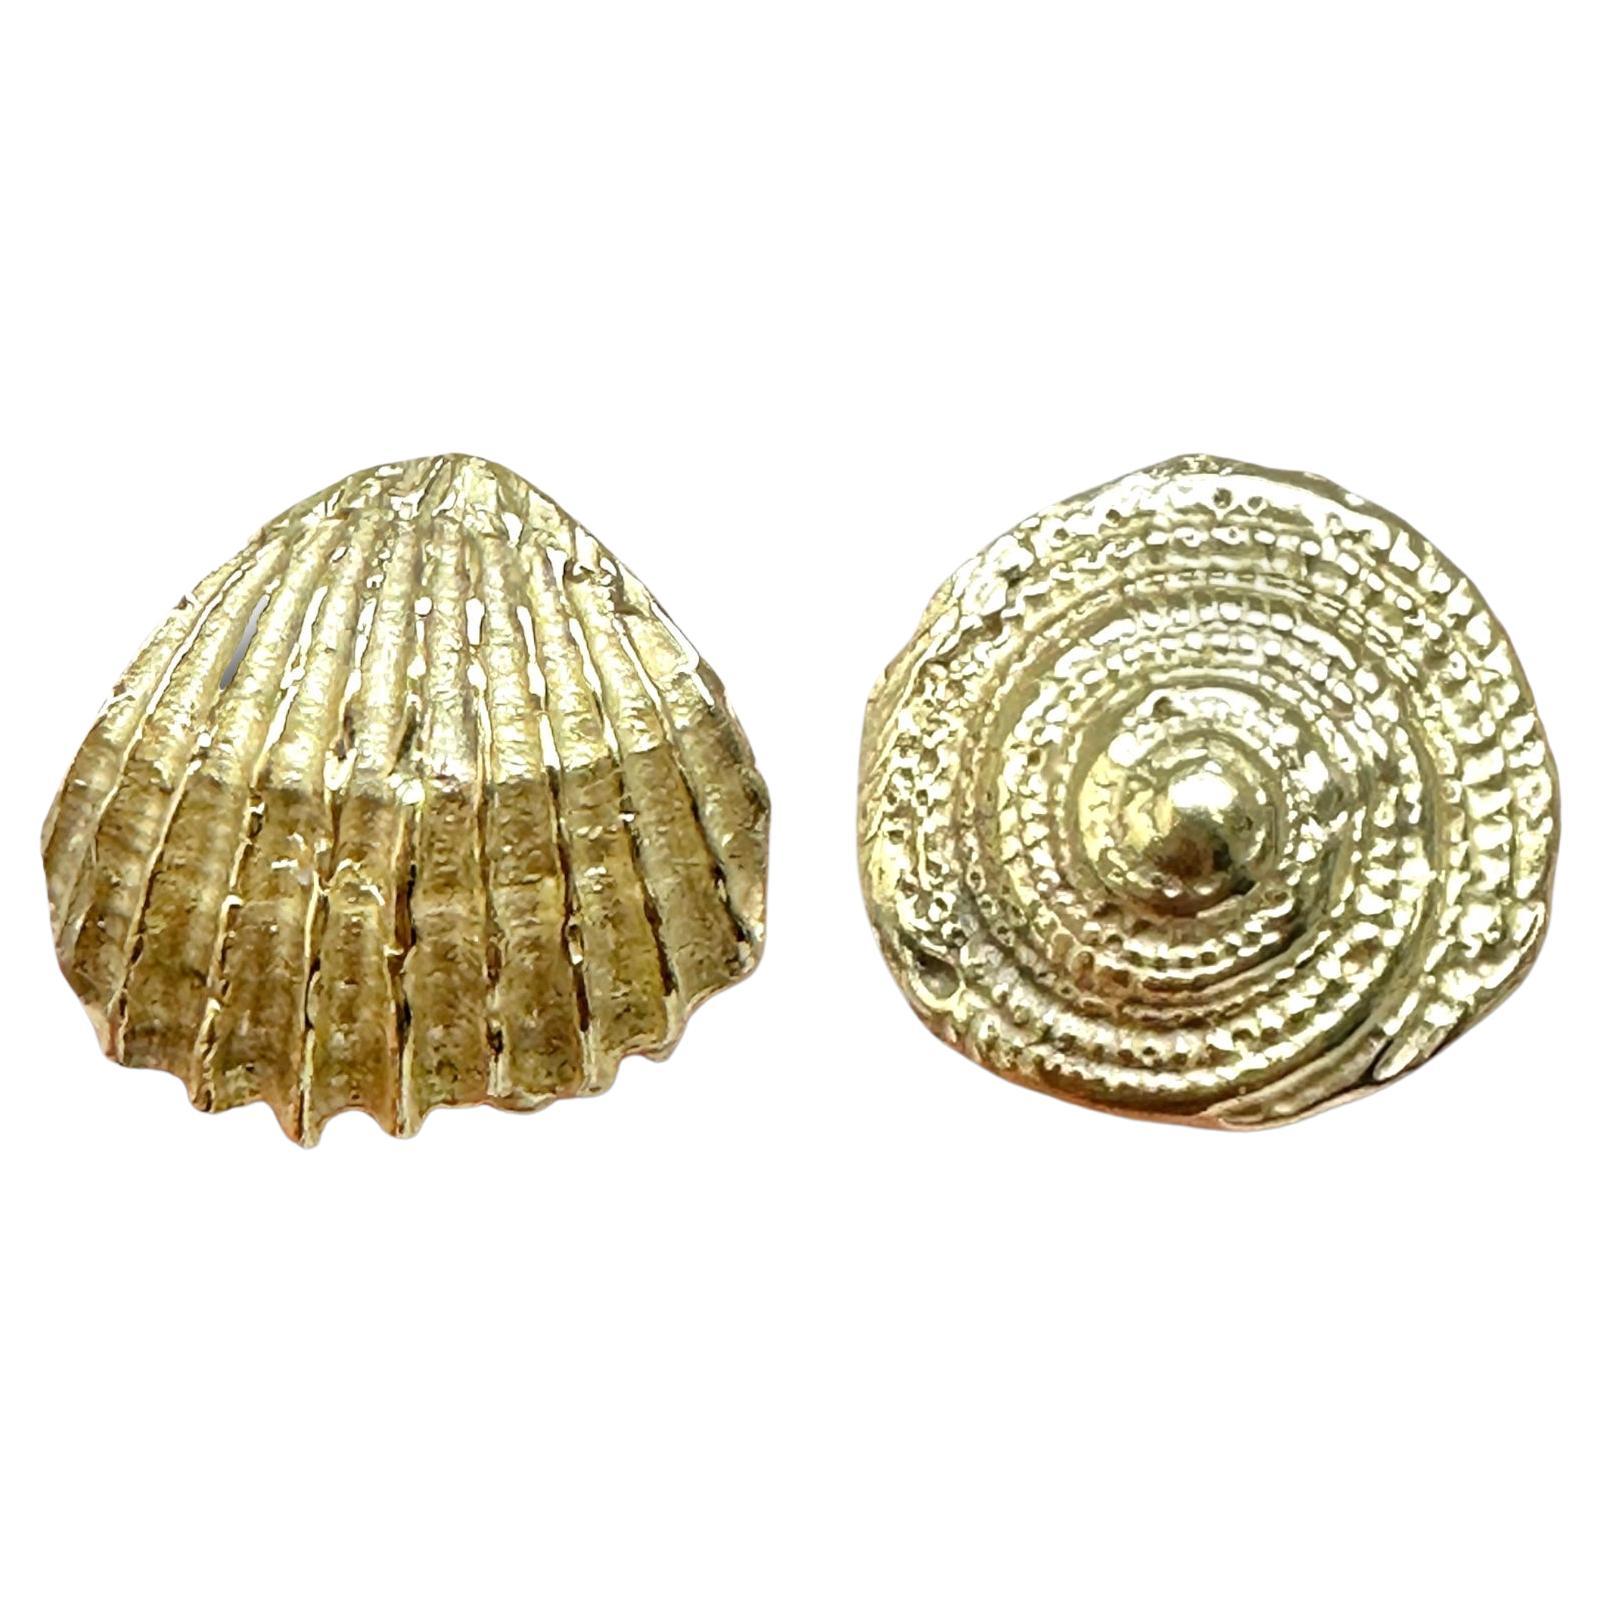 Snail and Sea Shell earring studs in gold one of a kind in stock